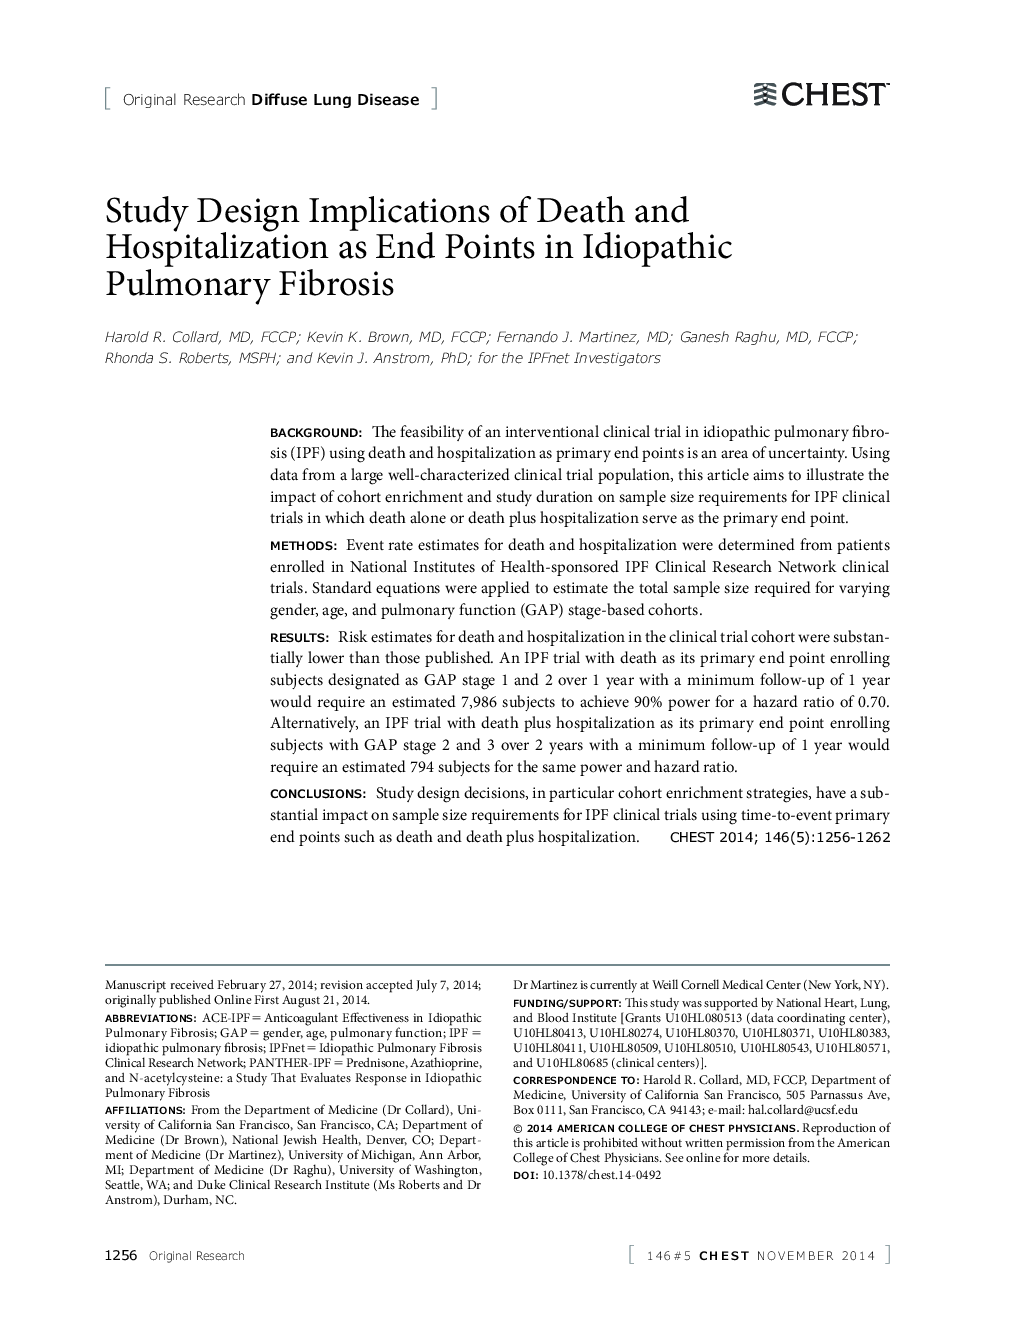 Study Design Implications of Death and Hospitalization as End Points in Idiopathic Pulmonary Fibrosis